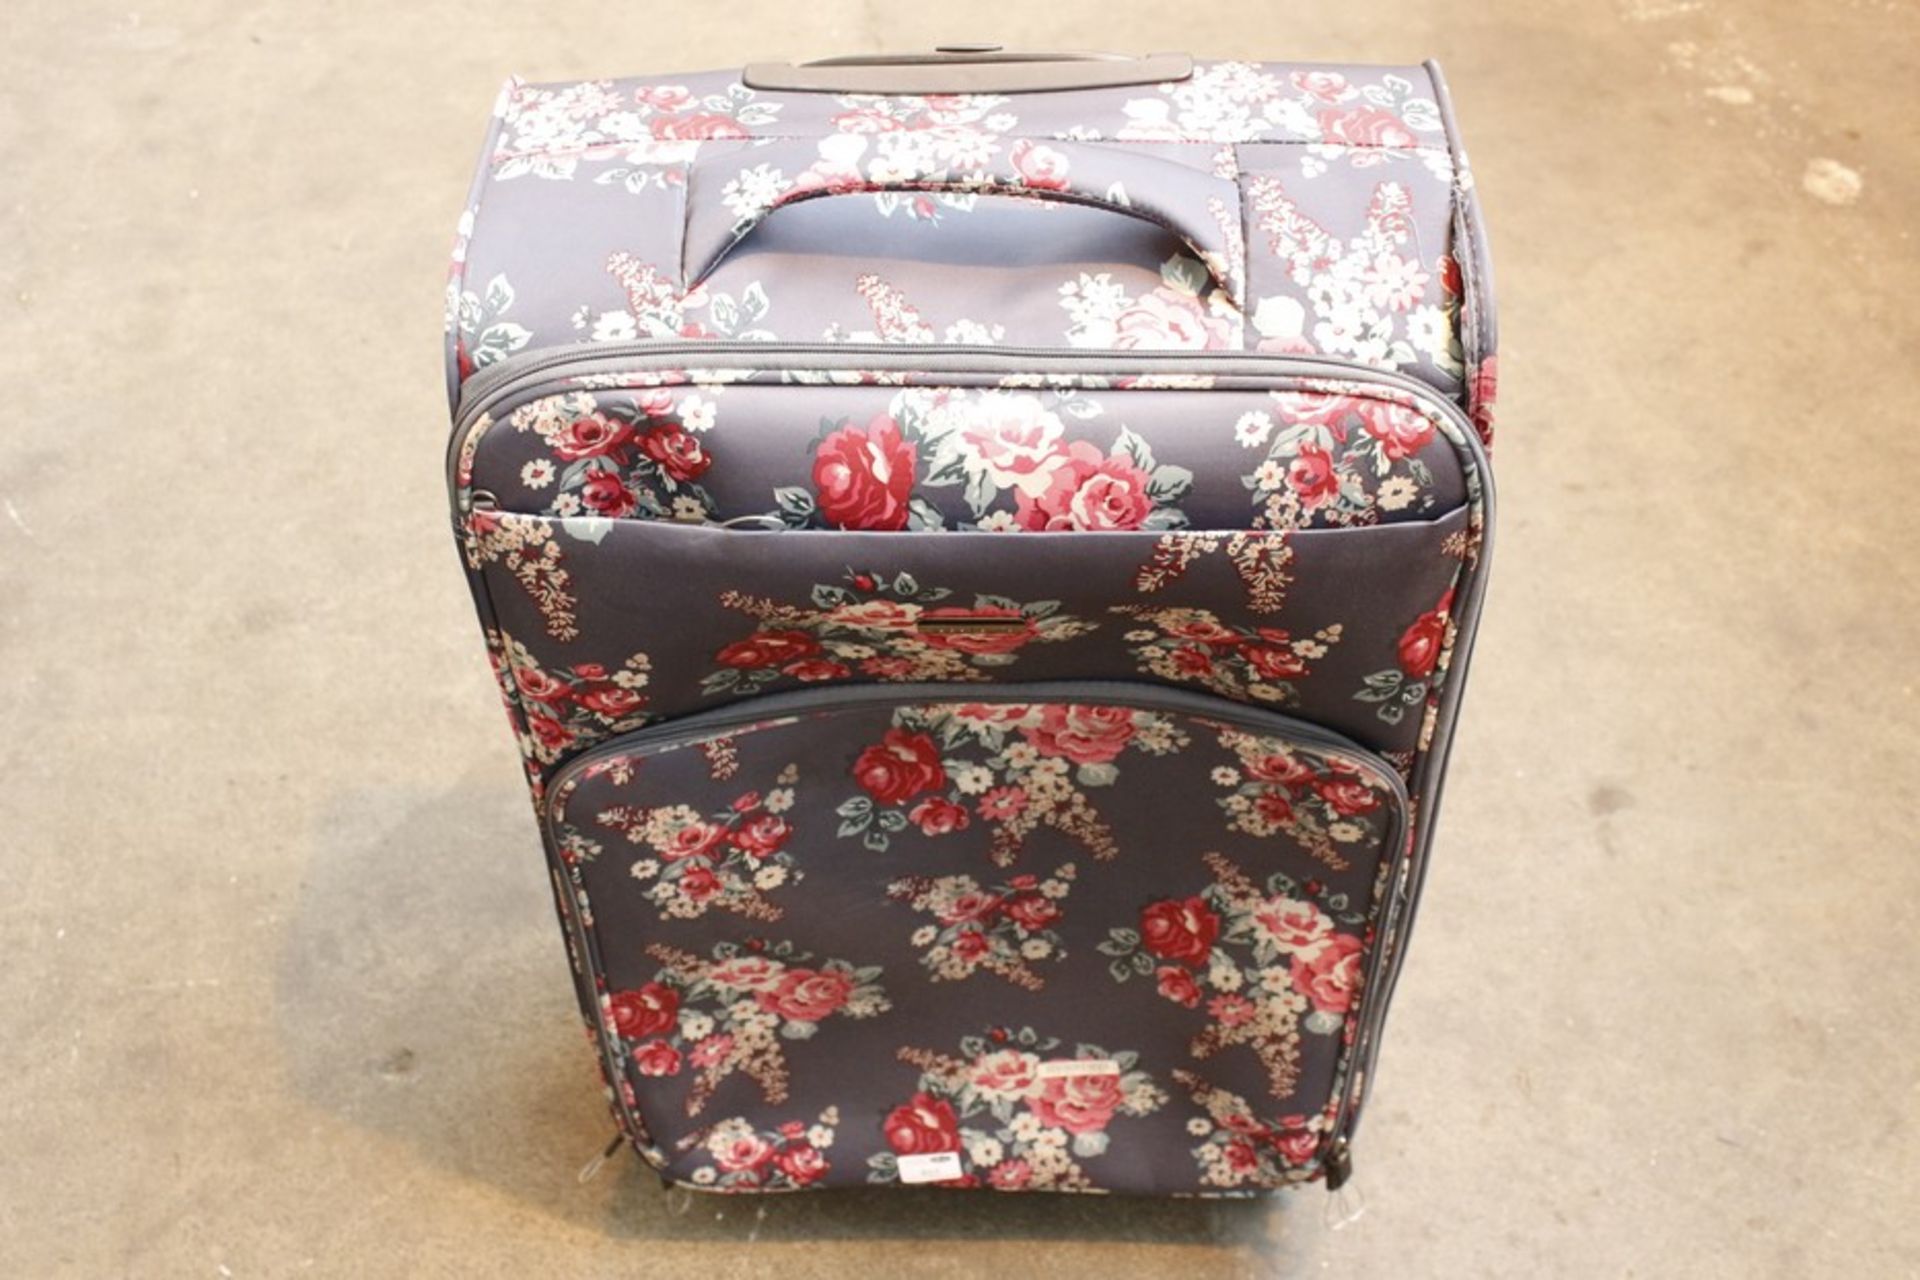 1 x FLORAL PRINT 360 WHEEL TROLLEY LUGGAGE SUITCASE   *PLEASE NOTE THAT THE BID PRICE IS